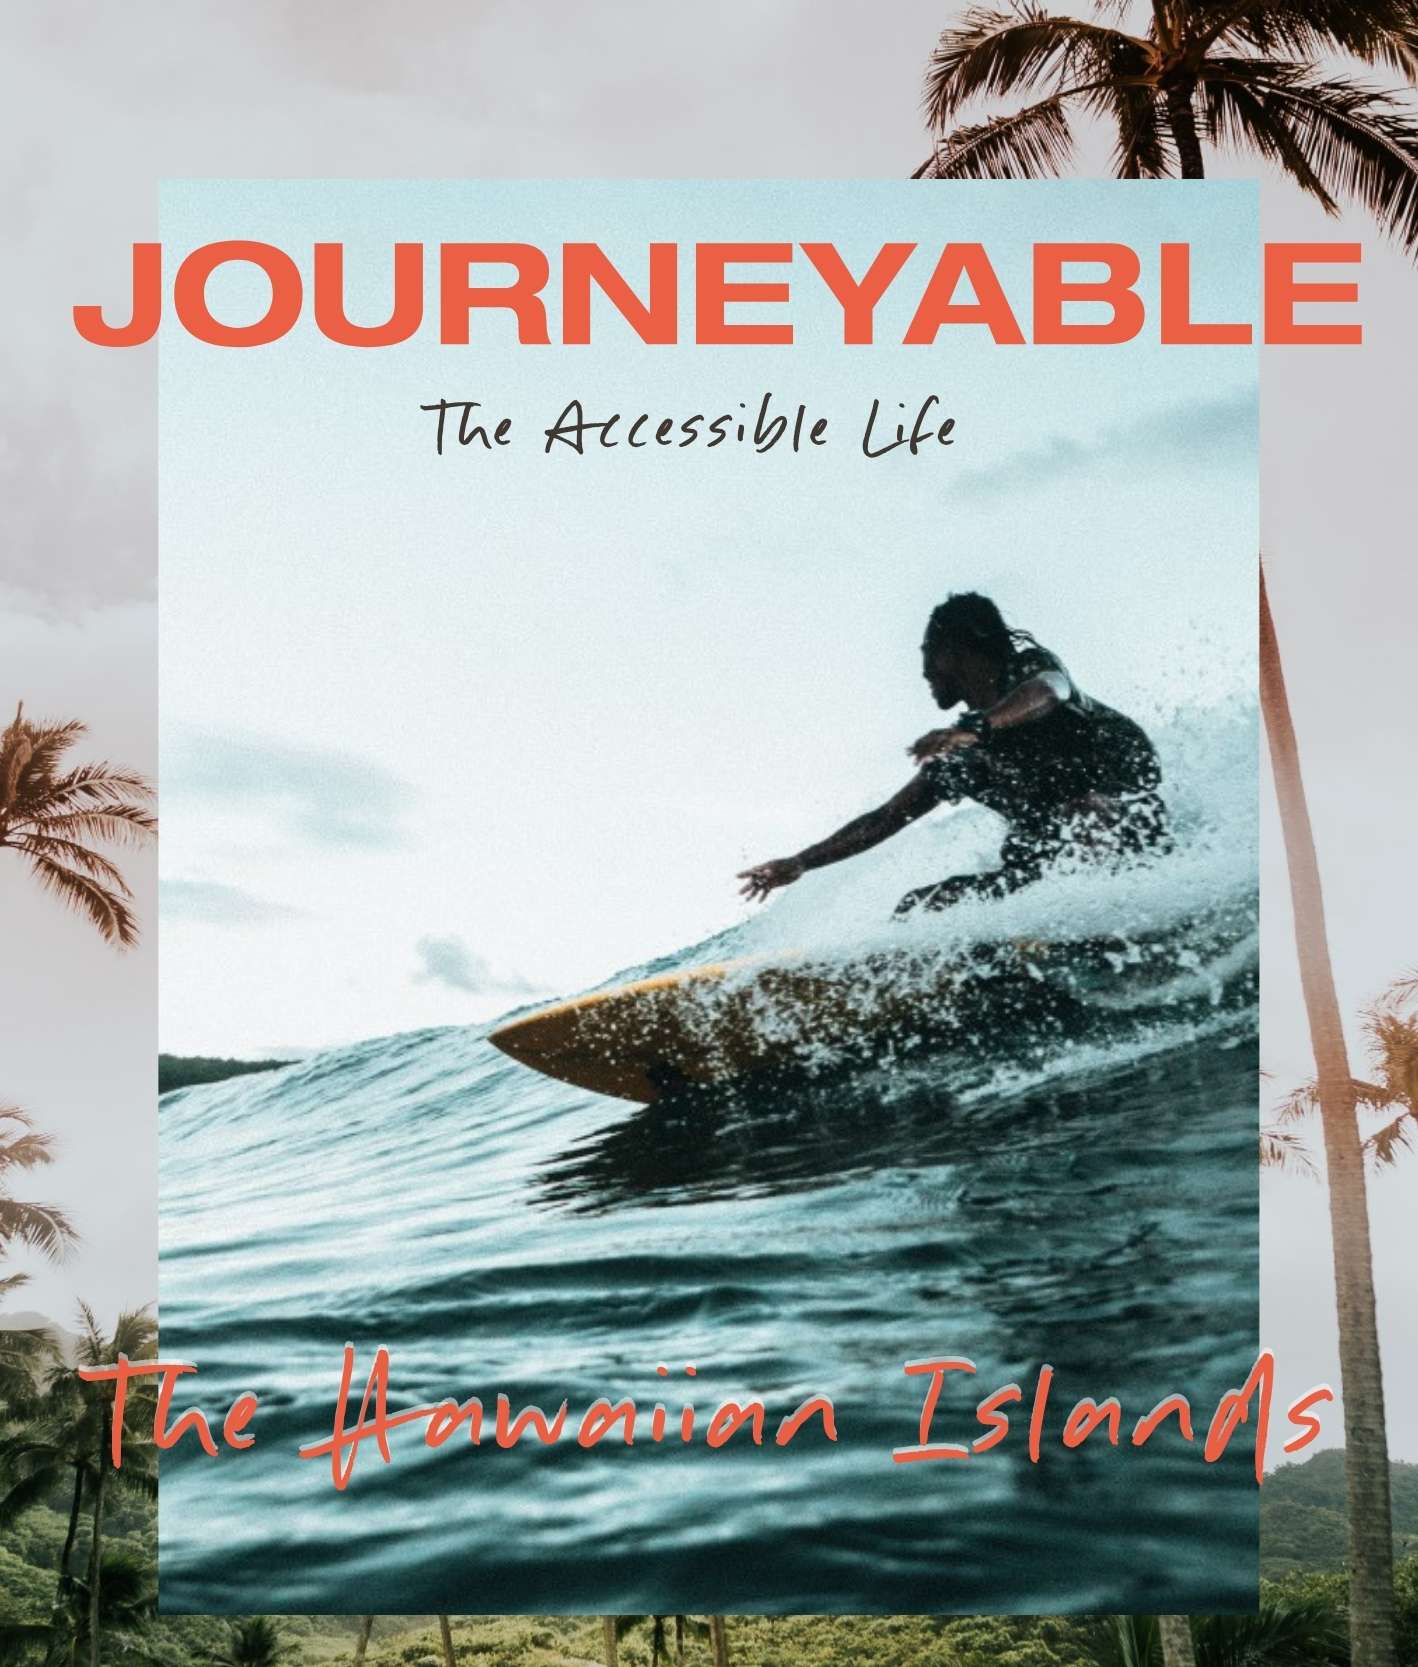 An image of a person surfing a wave and with the Journeyable Logo